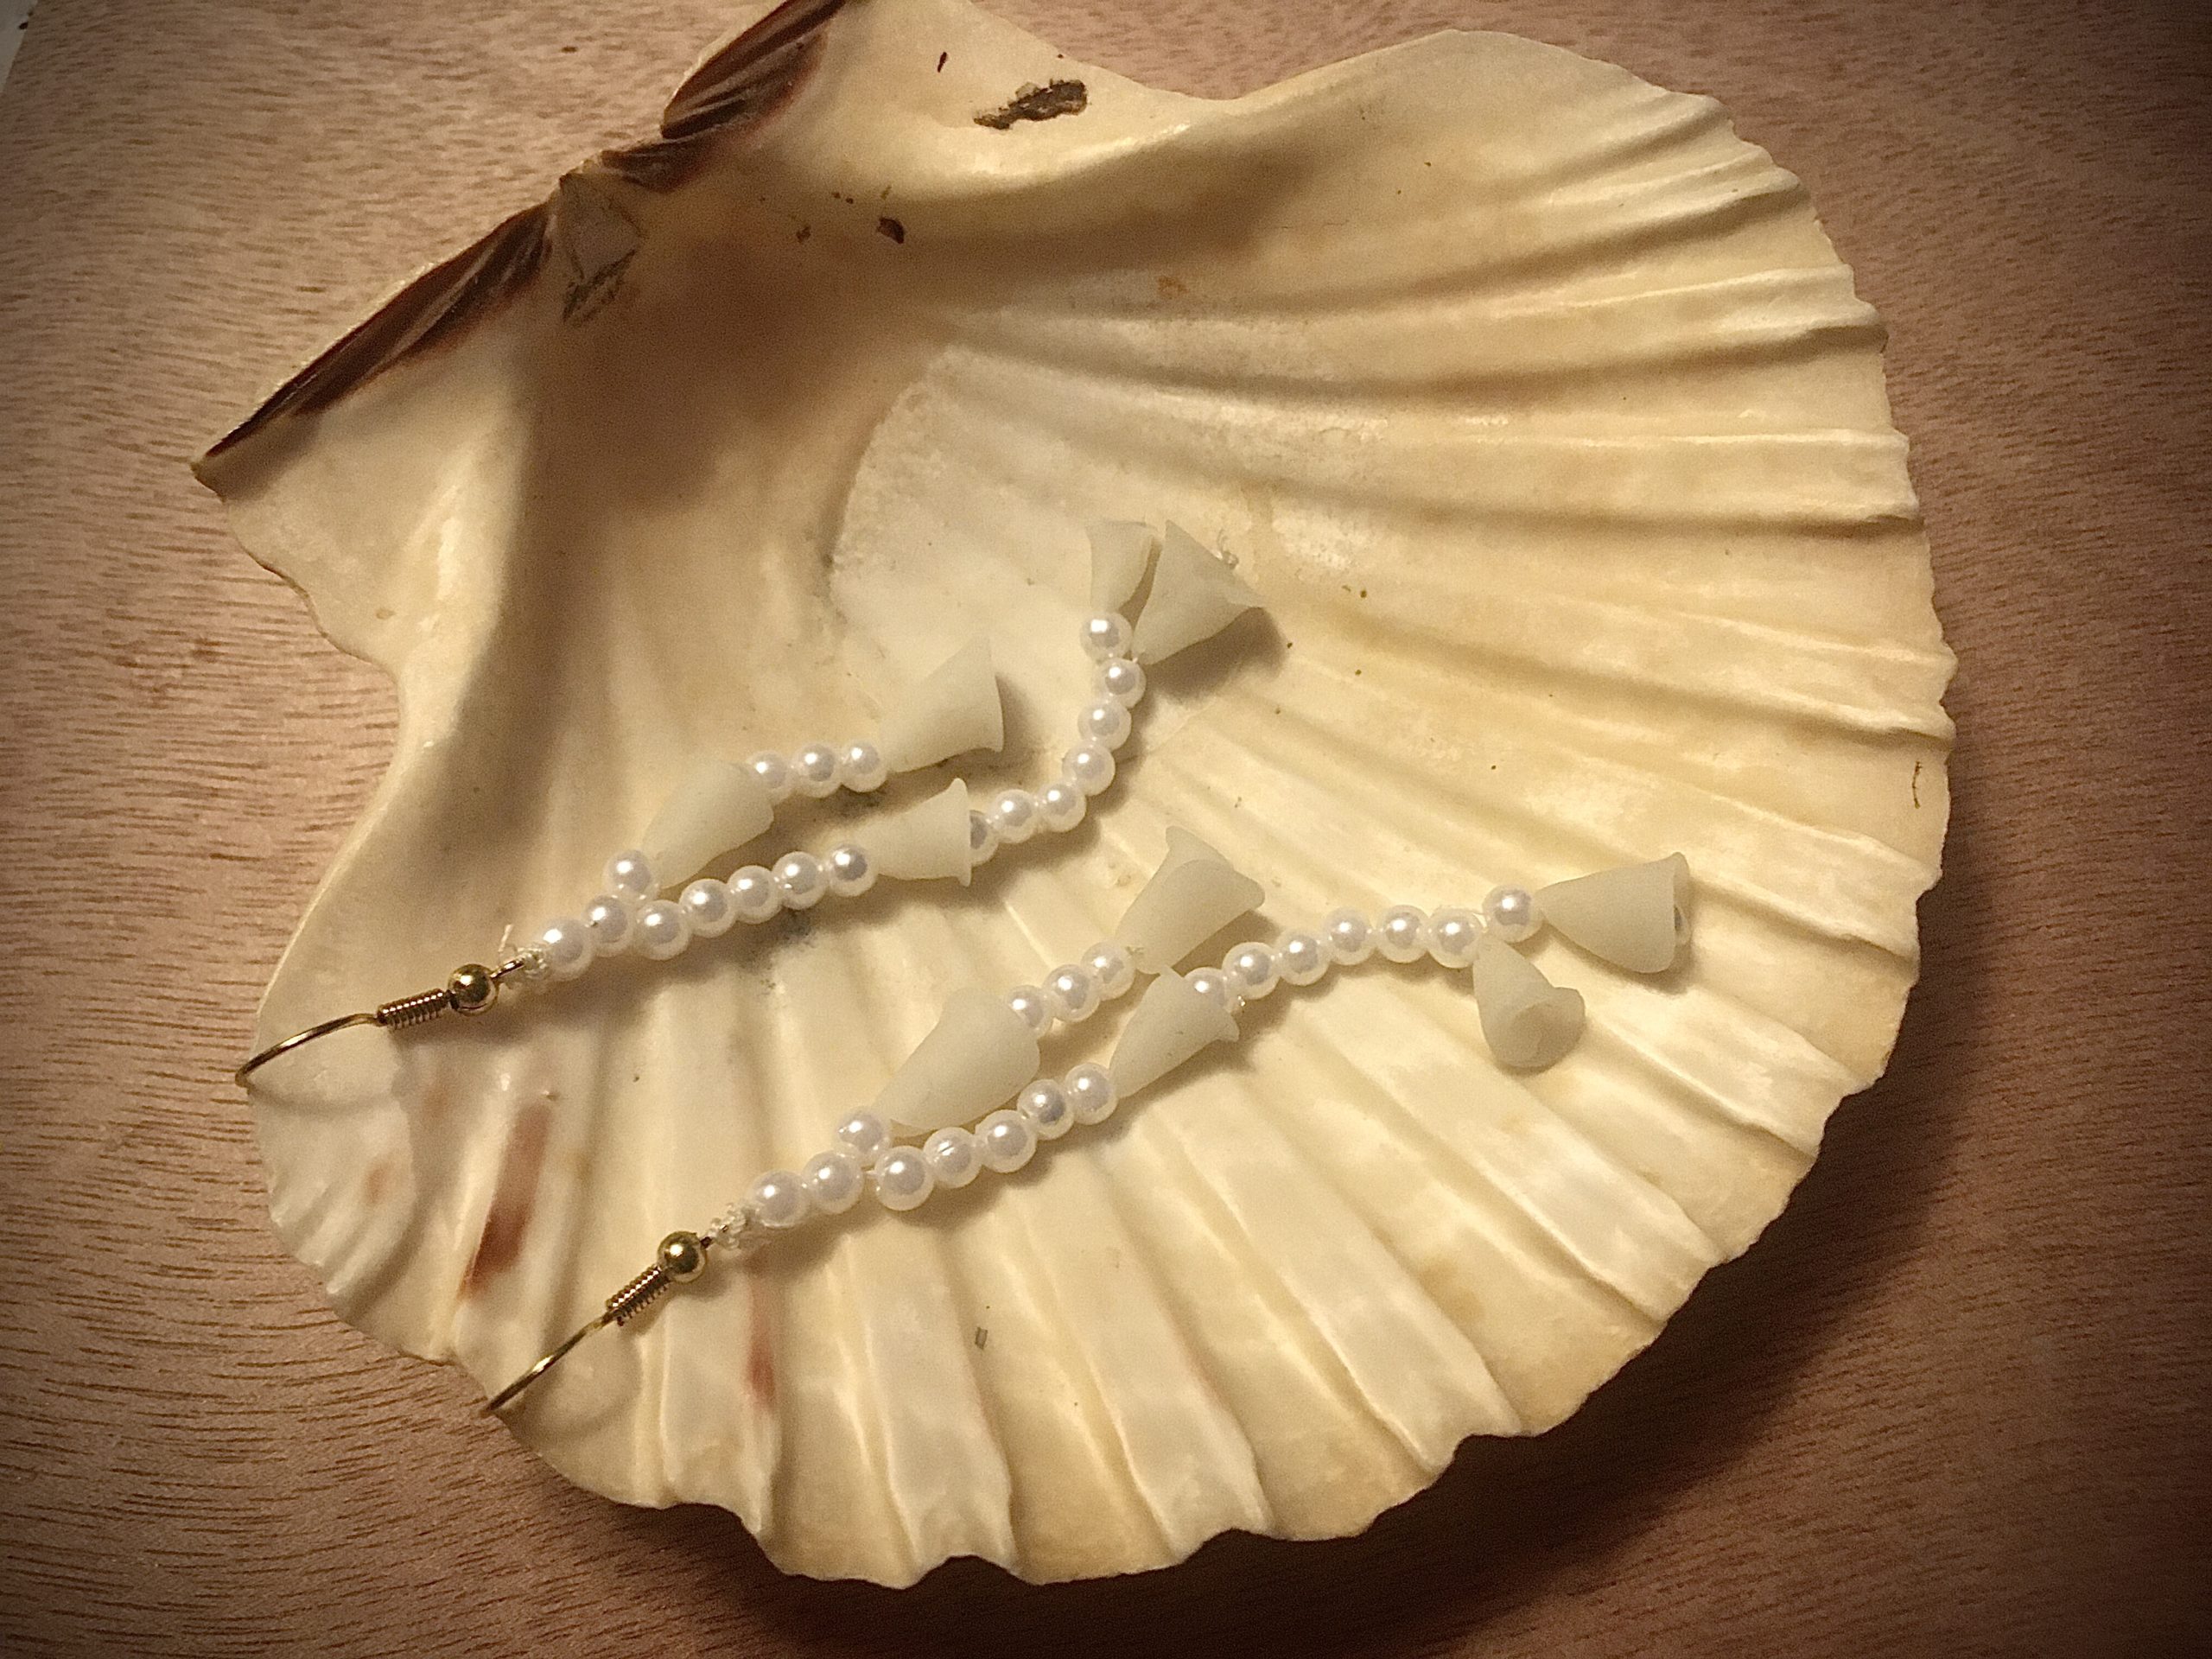 The journey in creating these pearl drops was fraught with danger as I nearly glued my fingers together.